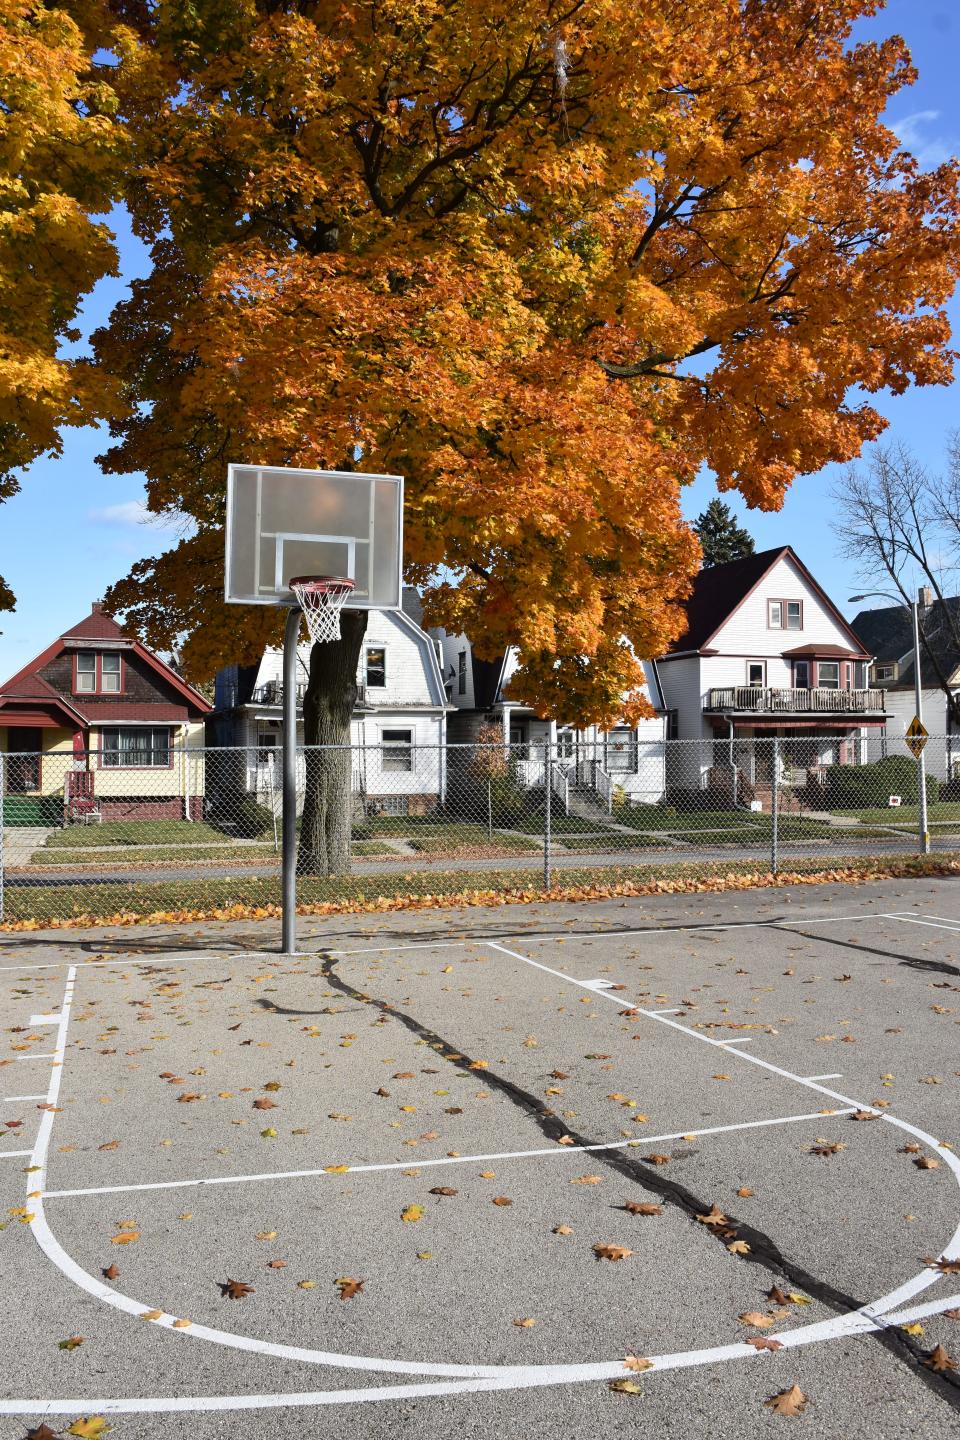 The basketball courts at Atkinson Triangle Park have been restored thanks to the Milwaukee Bucks, Colectivo Coffee, Milwaukee Parks Foundation, and Chris and Jennifer Abele.